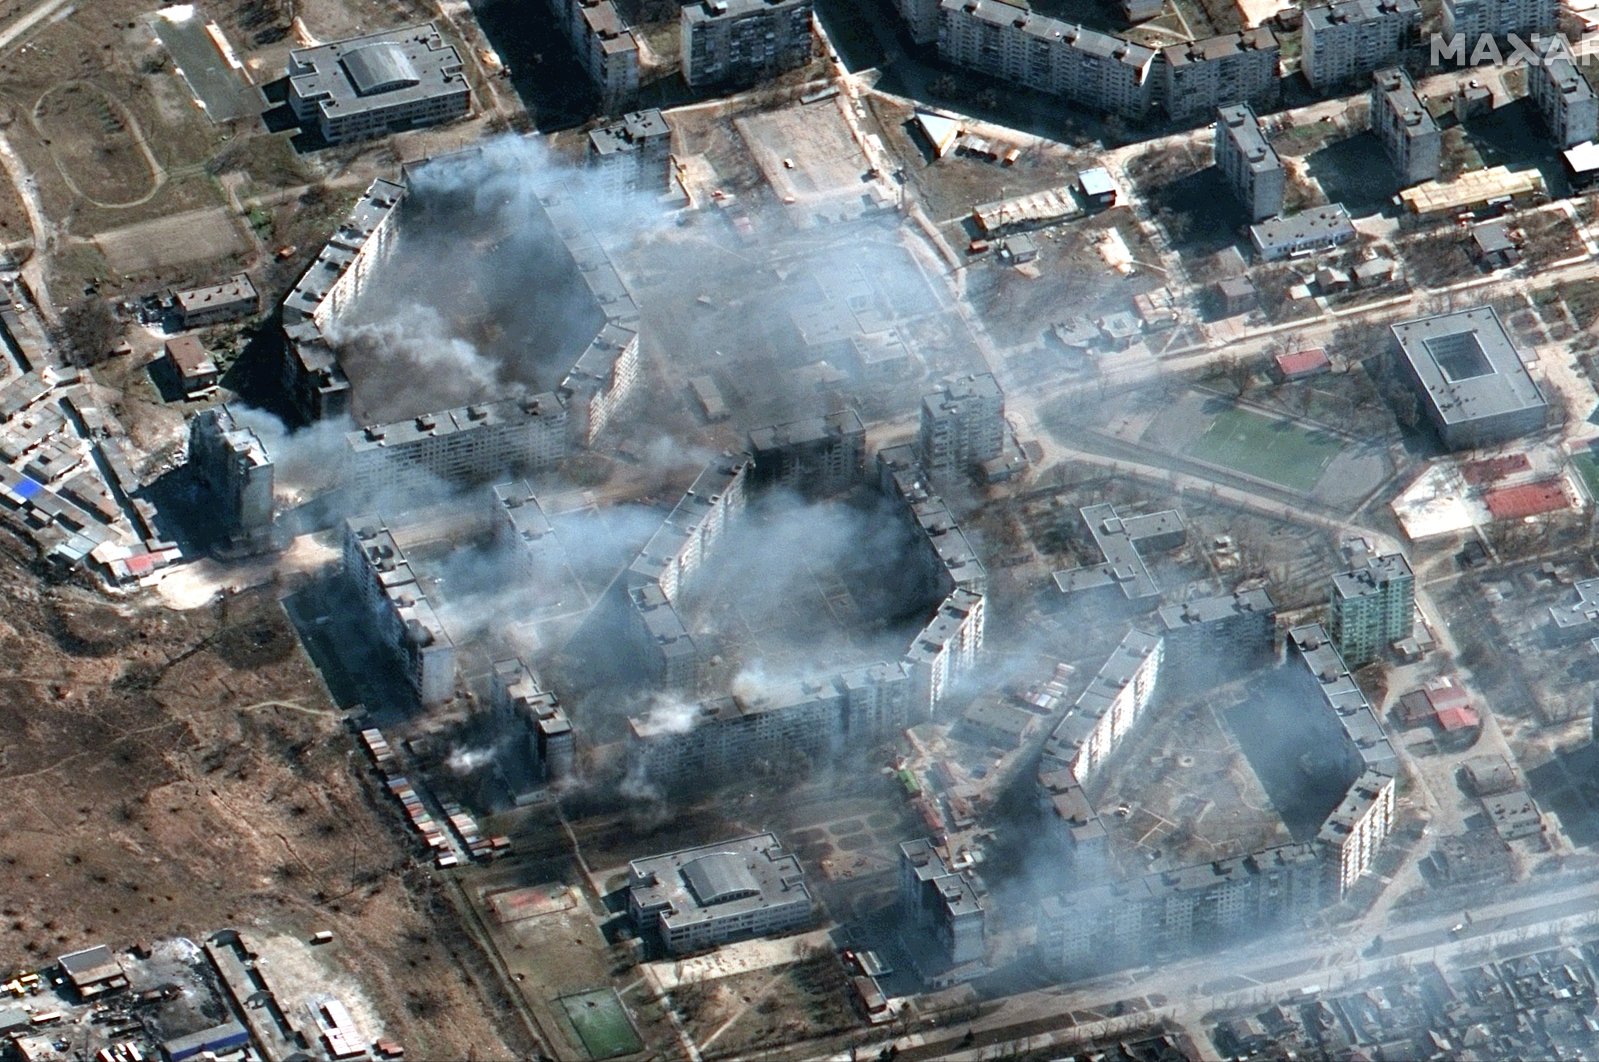 This satellite image provided by Maxar Technologies shows burning apartment buildings in northeastern Mariupol, Ukraine during the Russian invasion, March 19, 2022. (Maxar Technologies via AP)